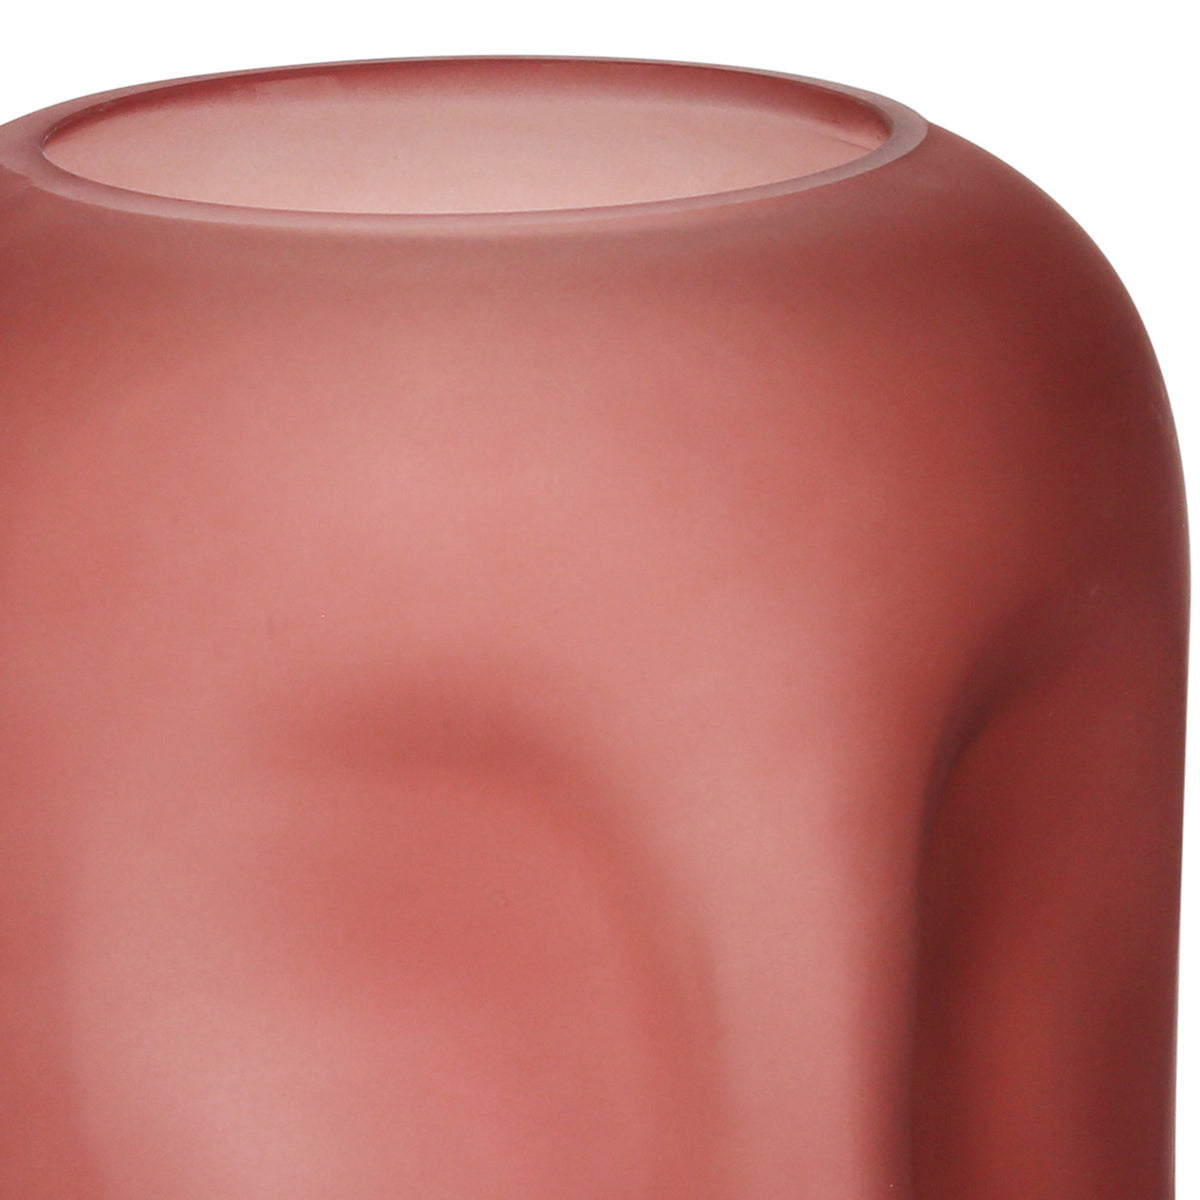 Contemporary Frosted Glass Face Sculpture Vase, Pink - BM206737